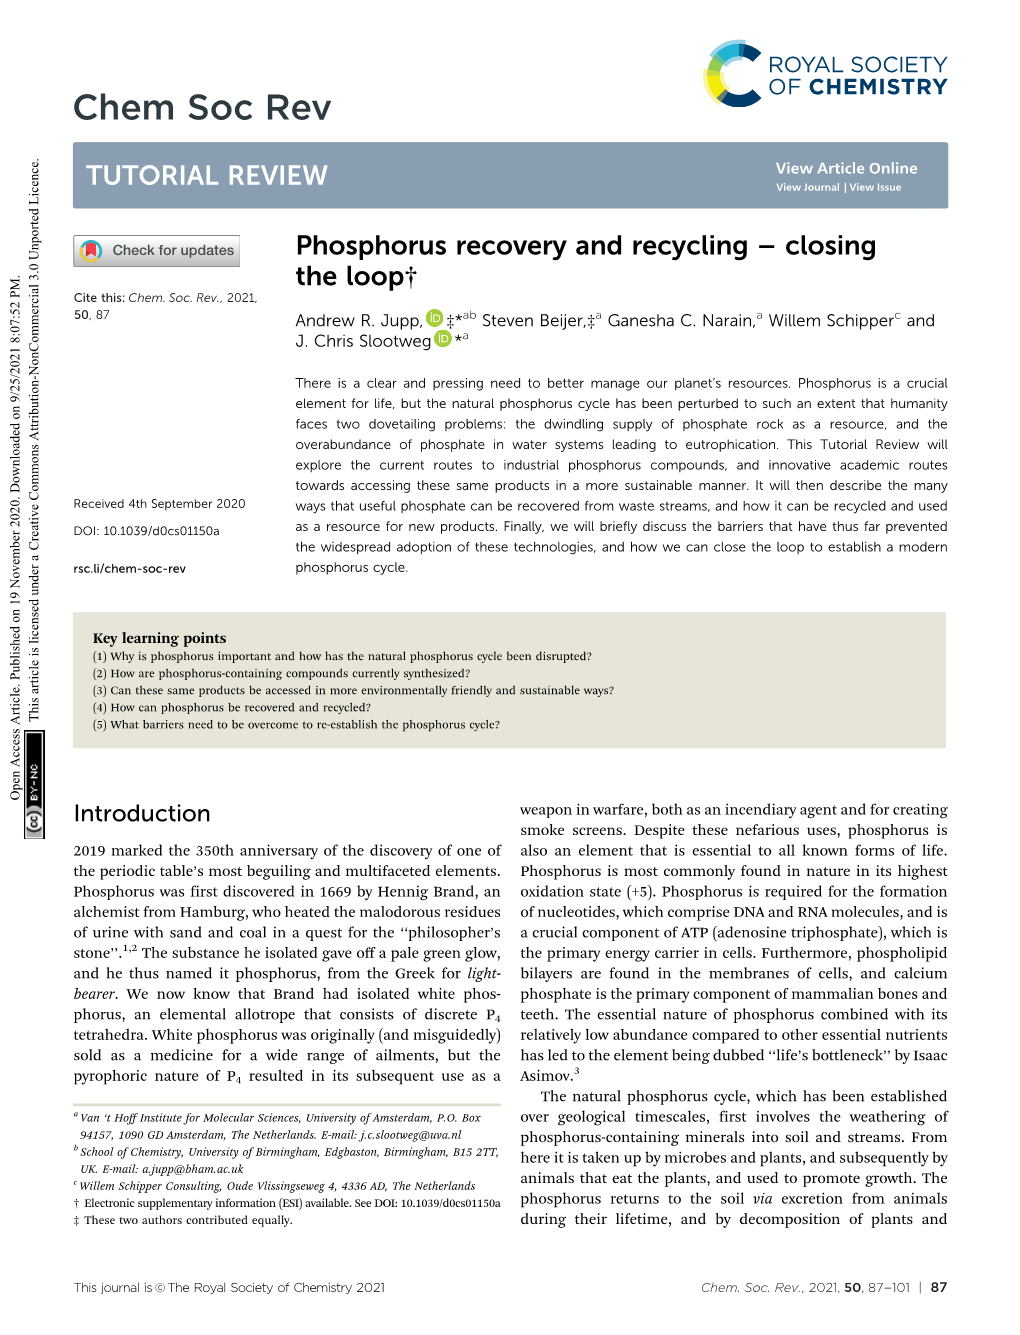 Phosphorus Recovery and Recycling &#X2013; Closing the Loop